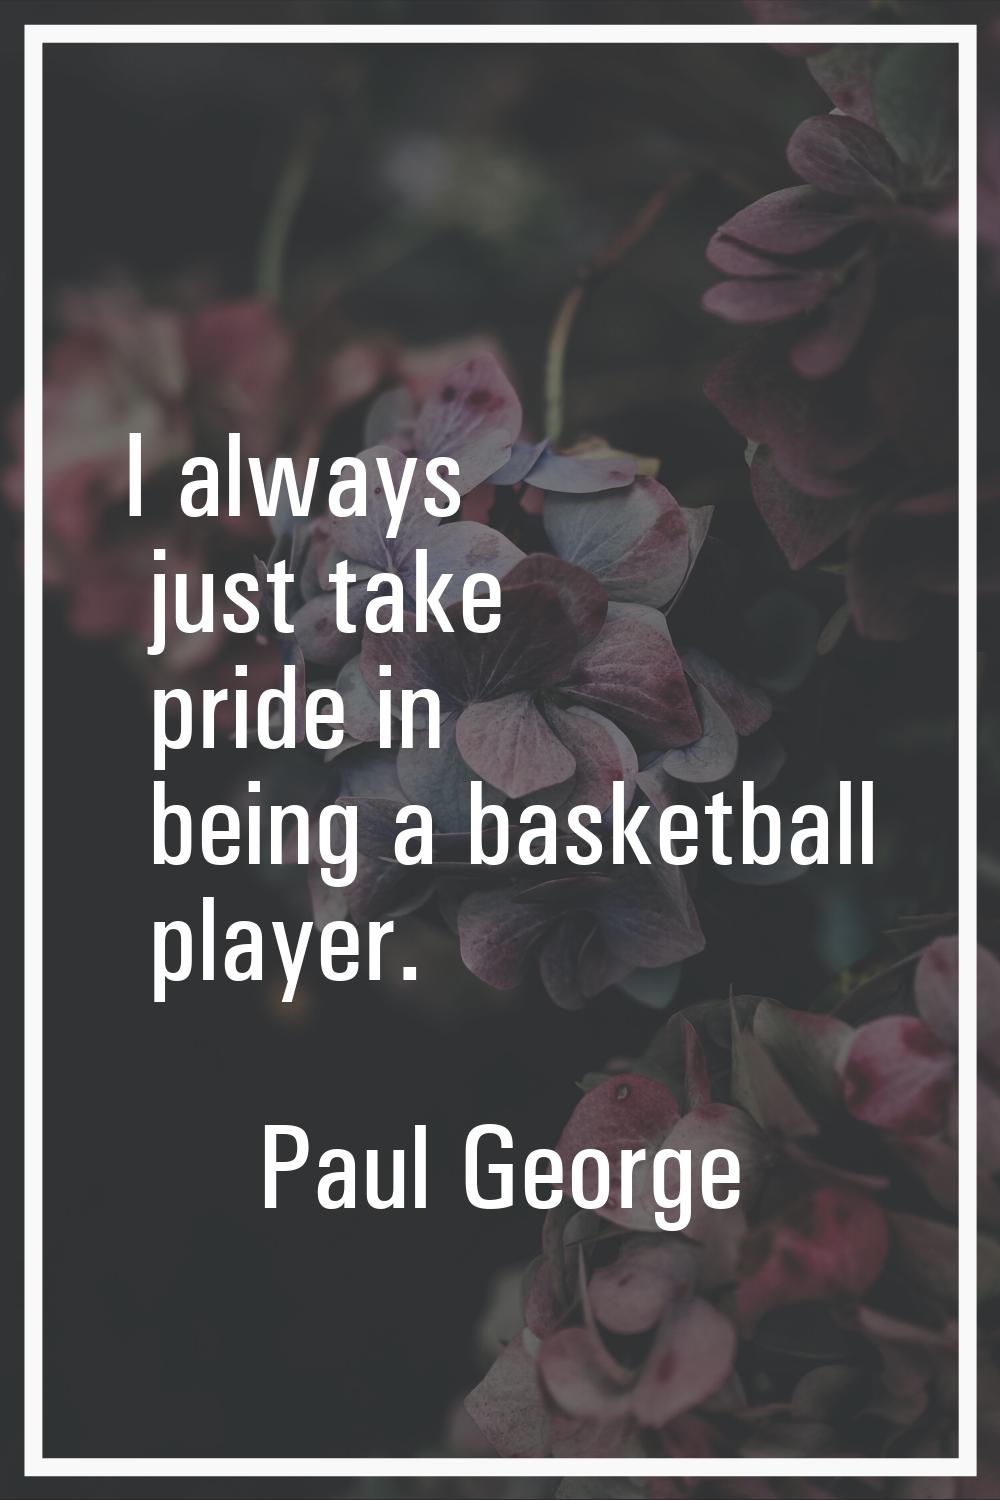 I always just take pride in being a basketball player.